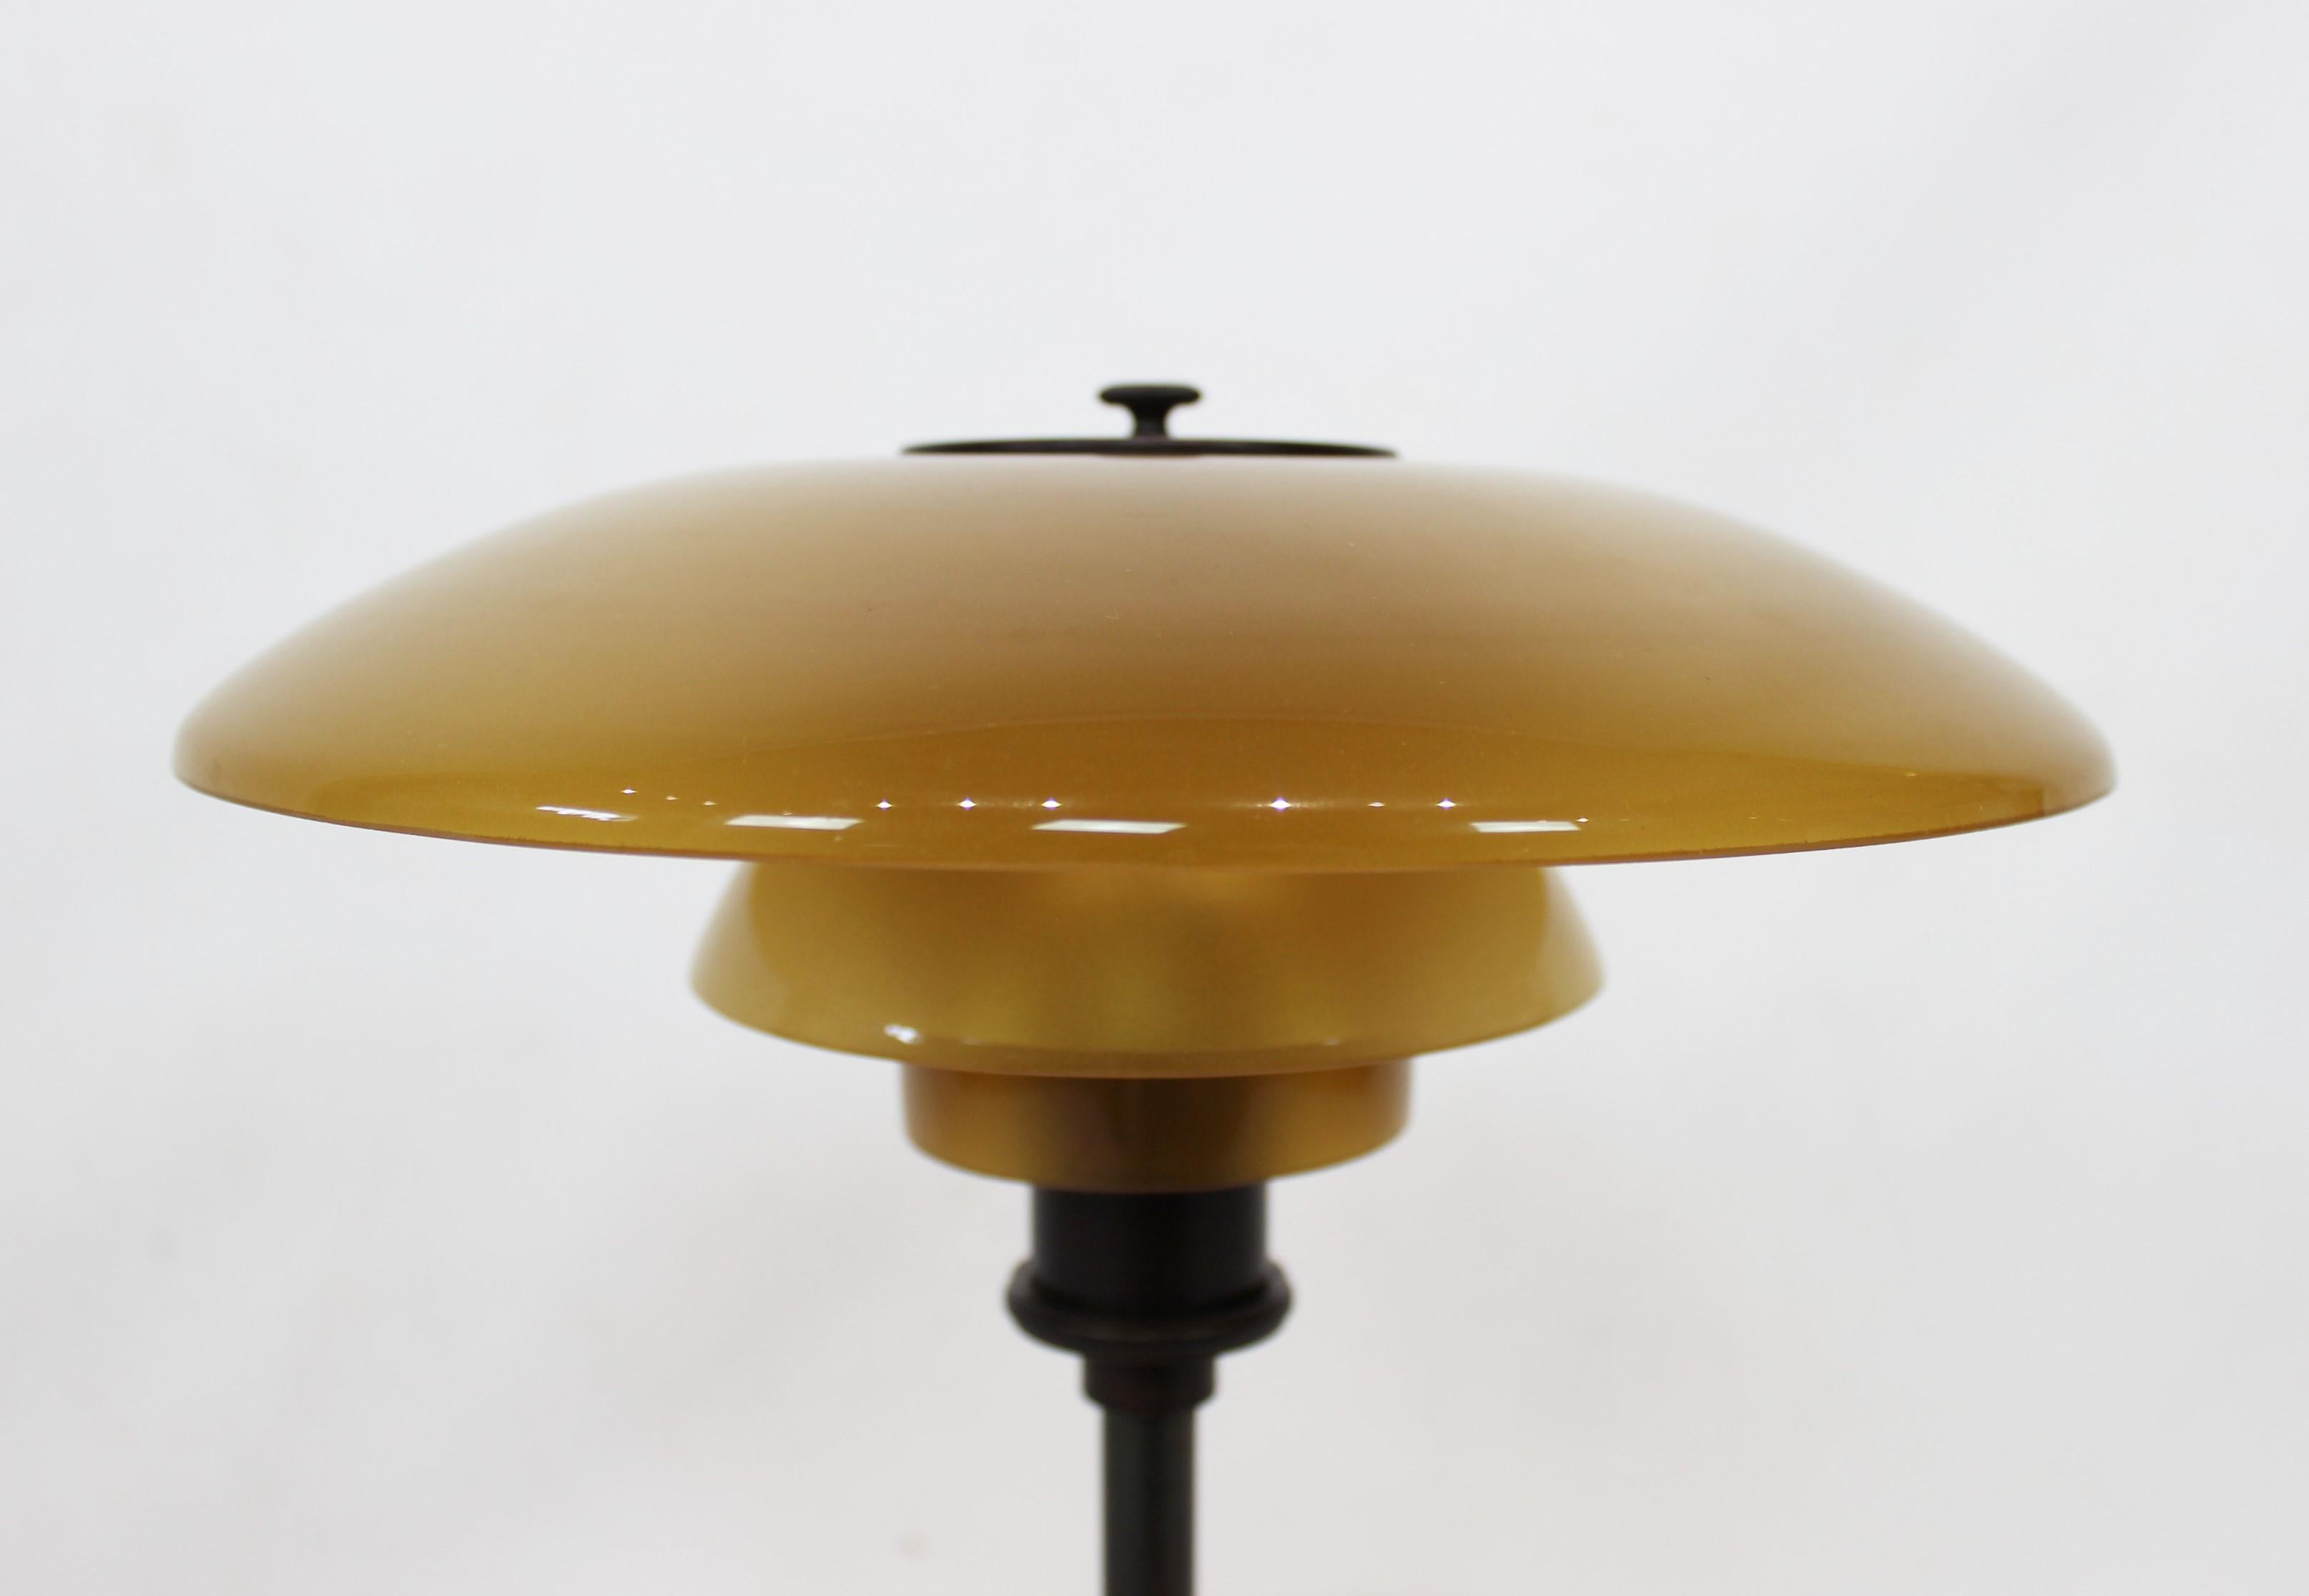 Brass PH 3/2 Tablelamp with Shades of Amber Colored Glass, 1930s